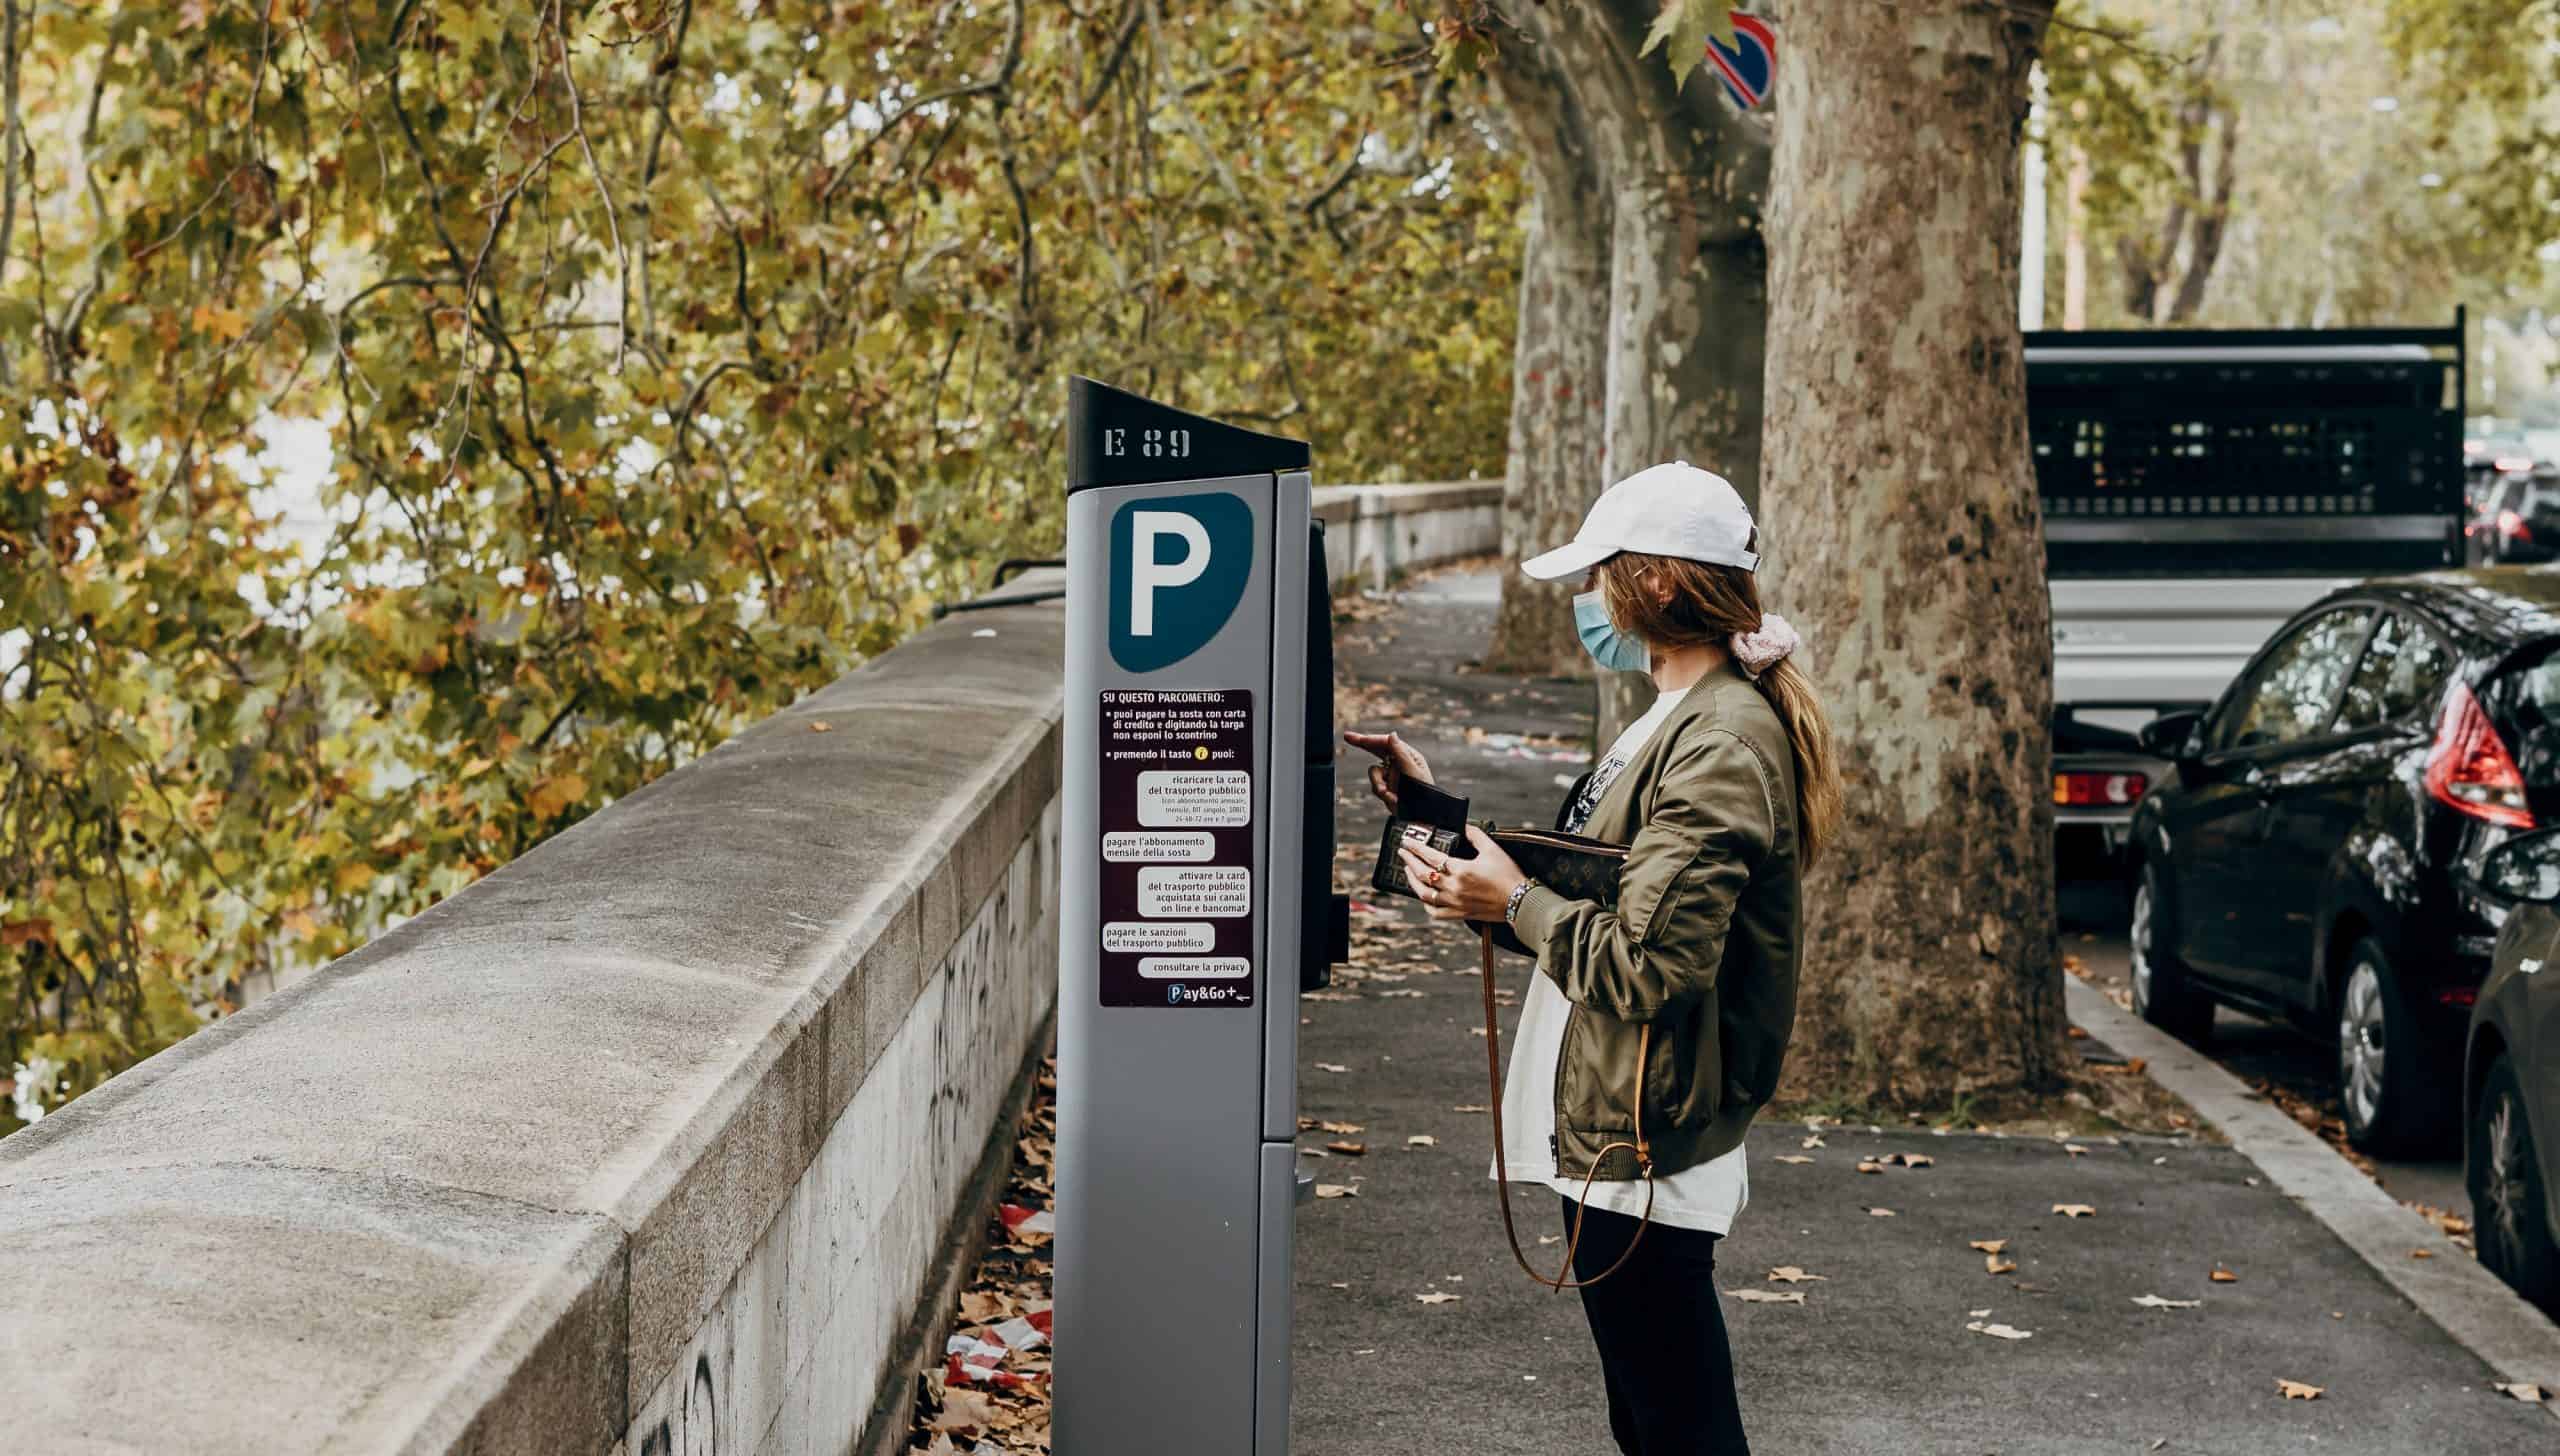 Solving Parking Problems with Parking Apps